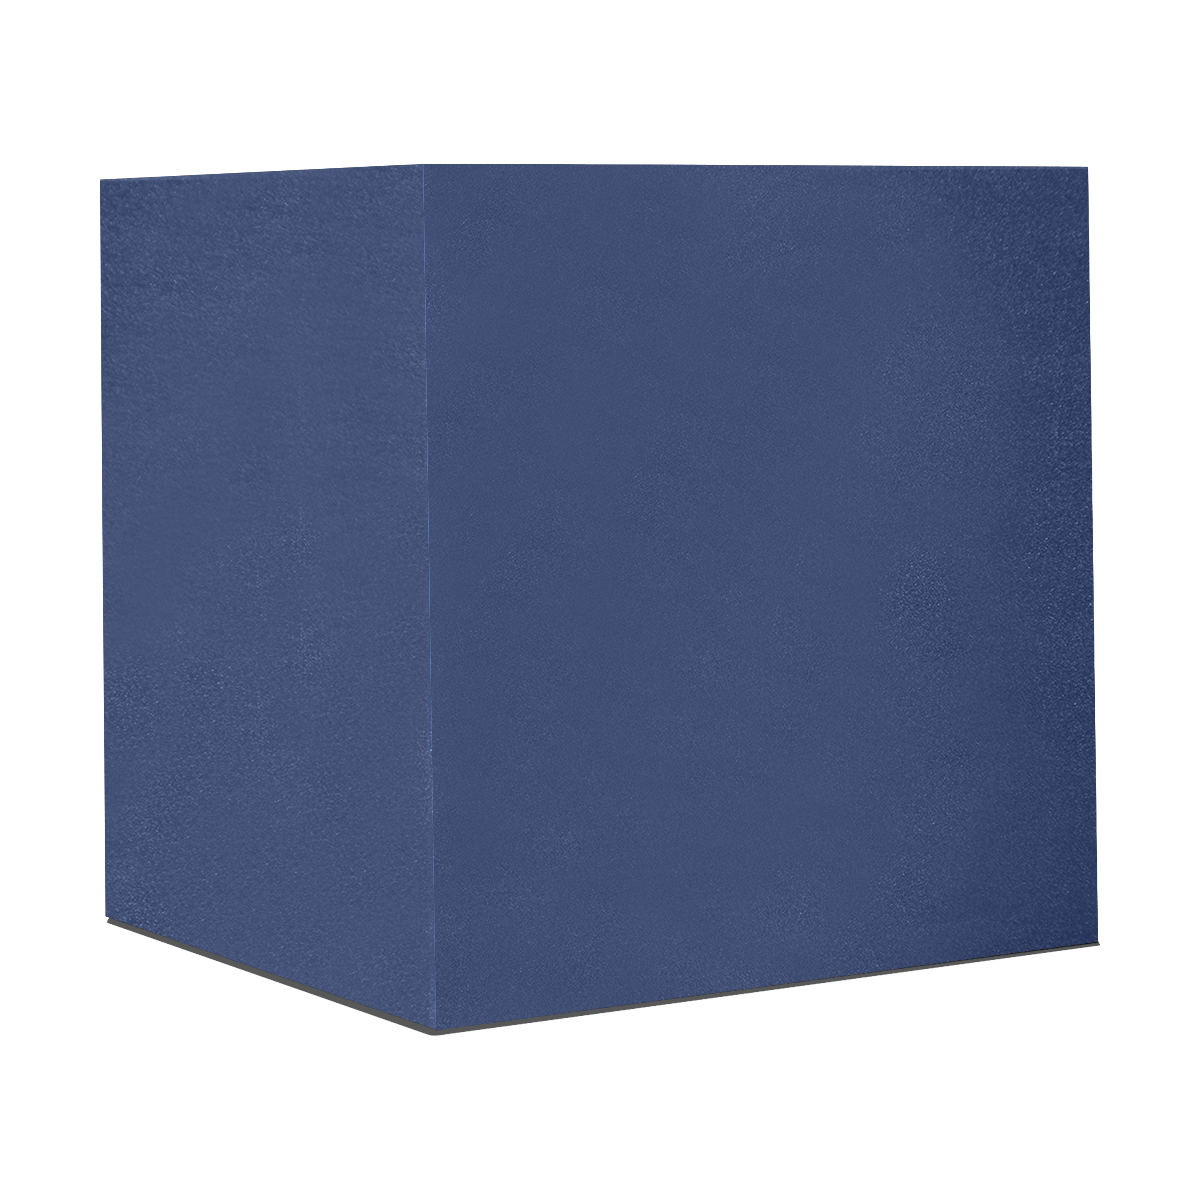 color Delft blue Gift Wrapping Paper 58"x 23" (1 Roll)